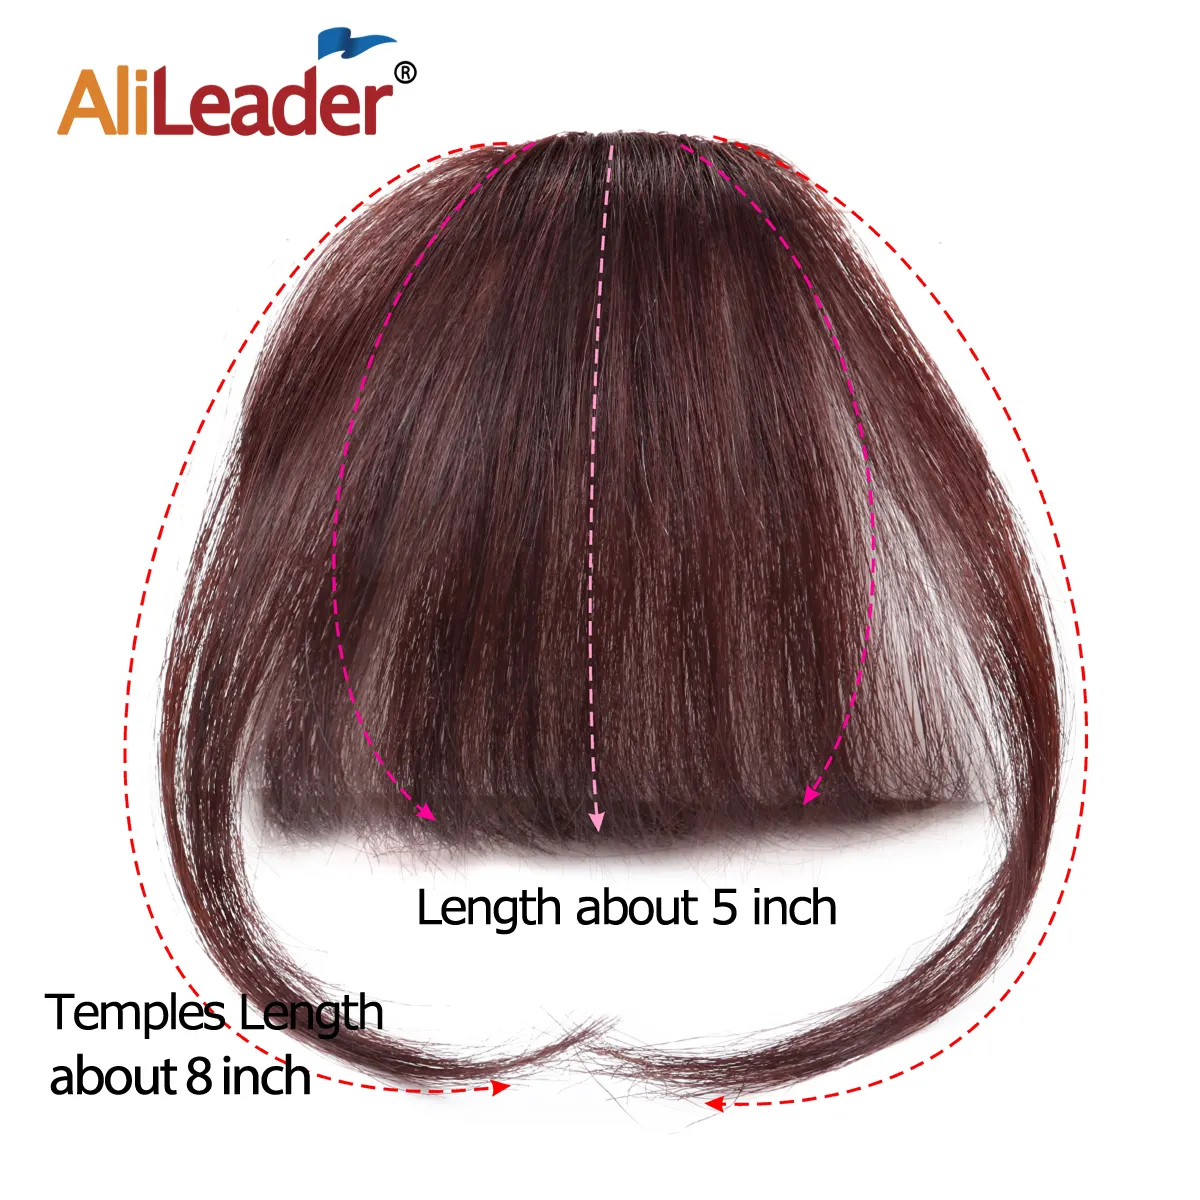 AliLeader Air Bangs One Clip On Hair Extension Straight Hair Pure Human Hair Bangs Front Neat Fringe